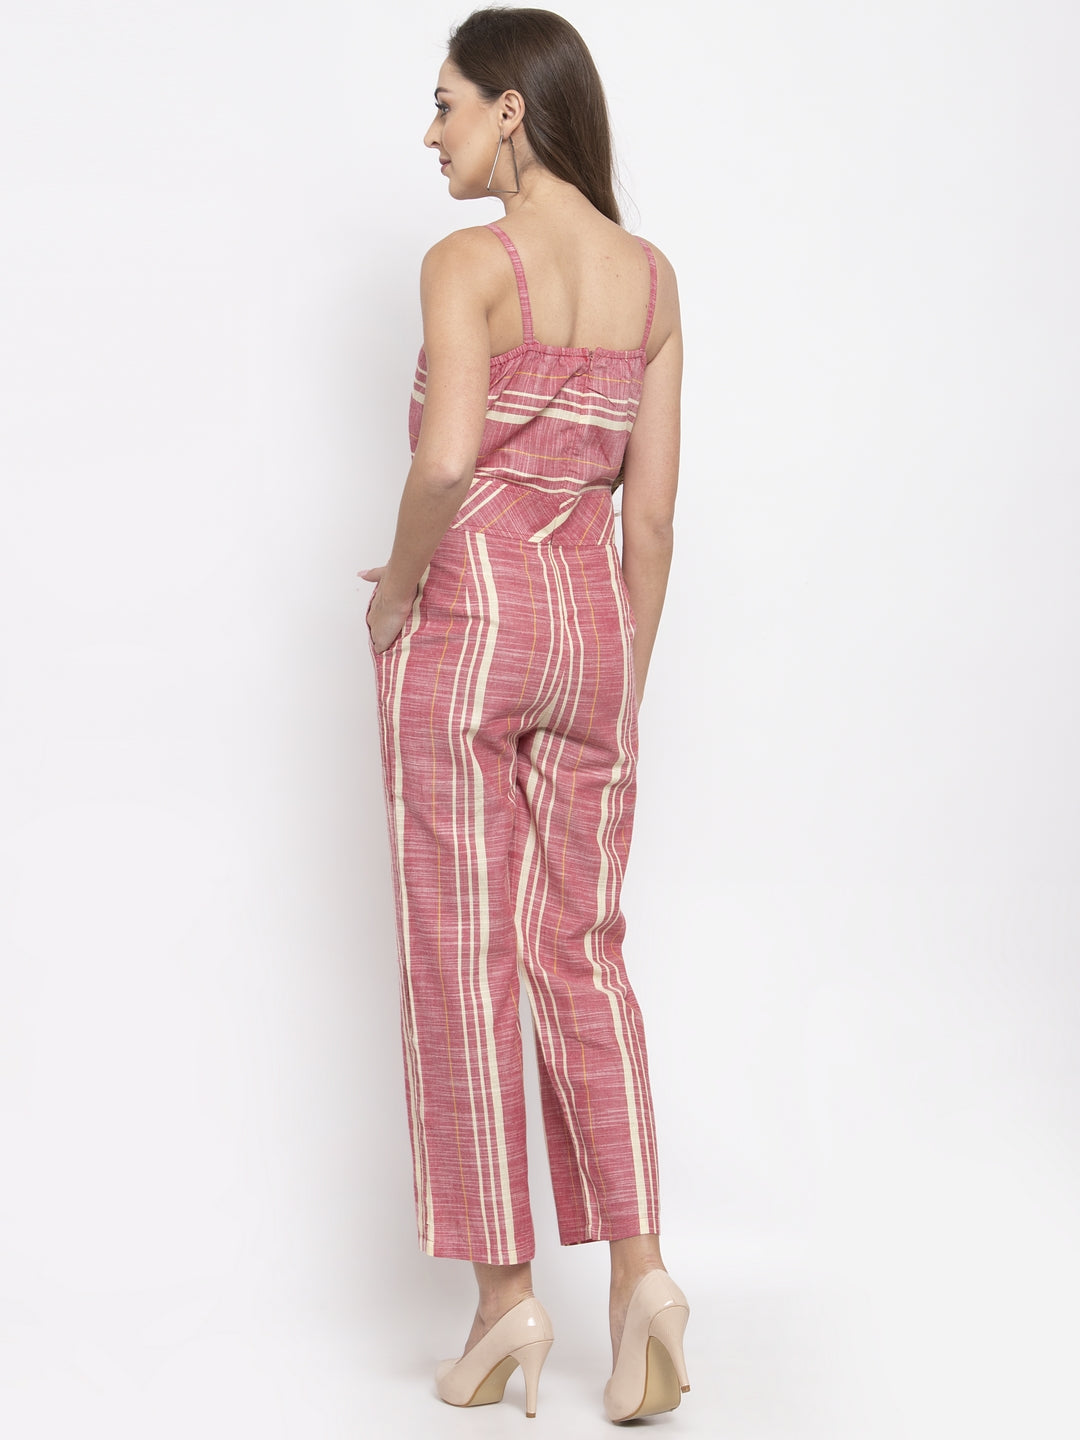 Women Red & Off-White Striped Basic Jumpsuit